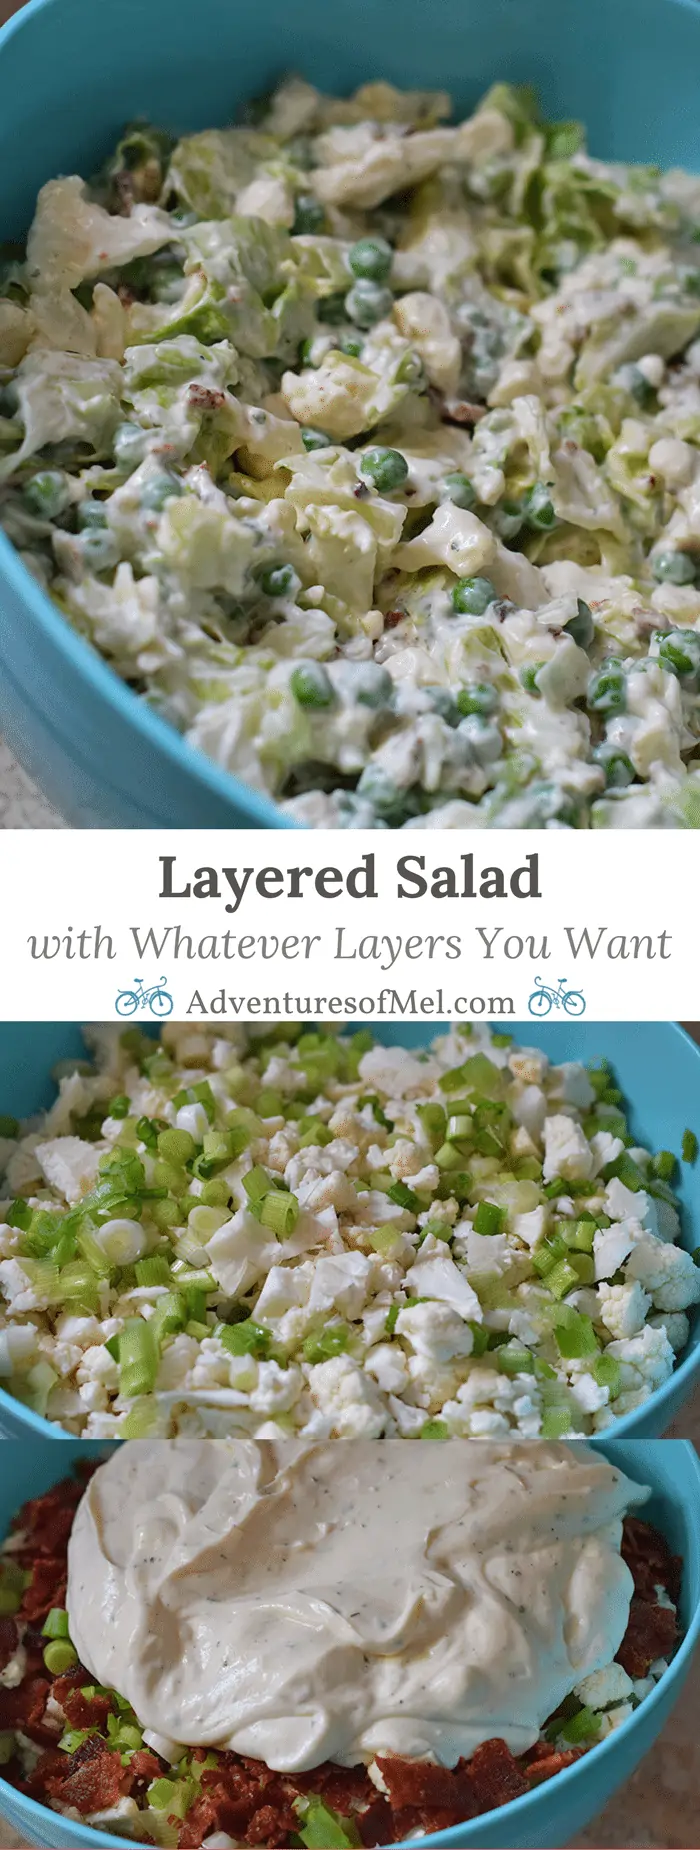 Layered Salad is the perfect salad recipe for family get-togethers, parties, or your next BBQ. You can add whatever types of layers you want, including cauliflower, peas, lettuce, bacon, or whatever else your heart desires.